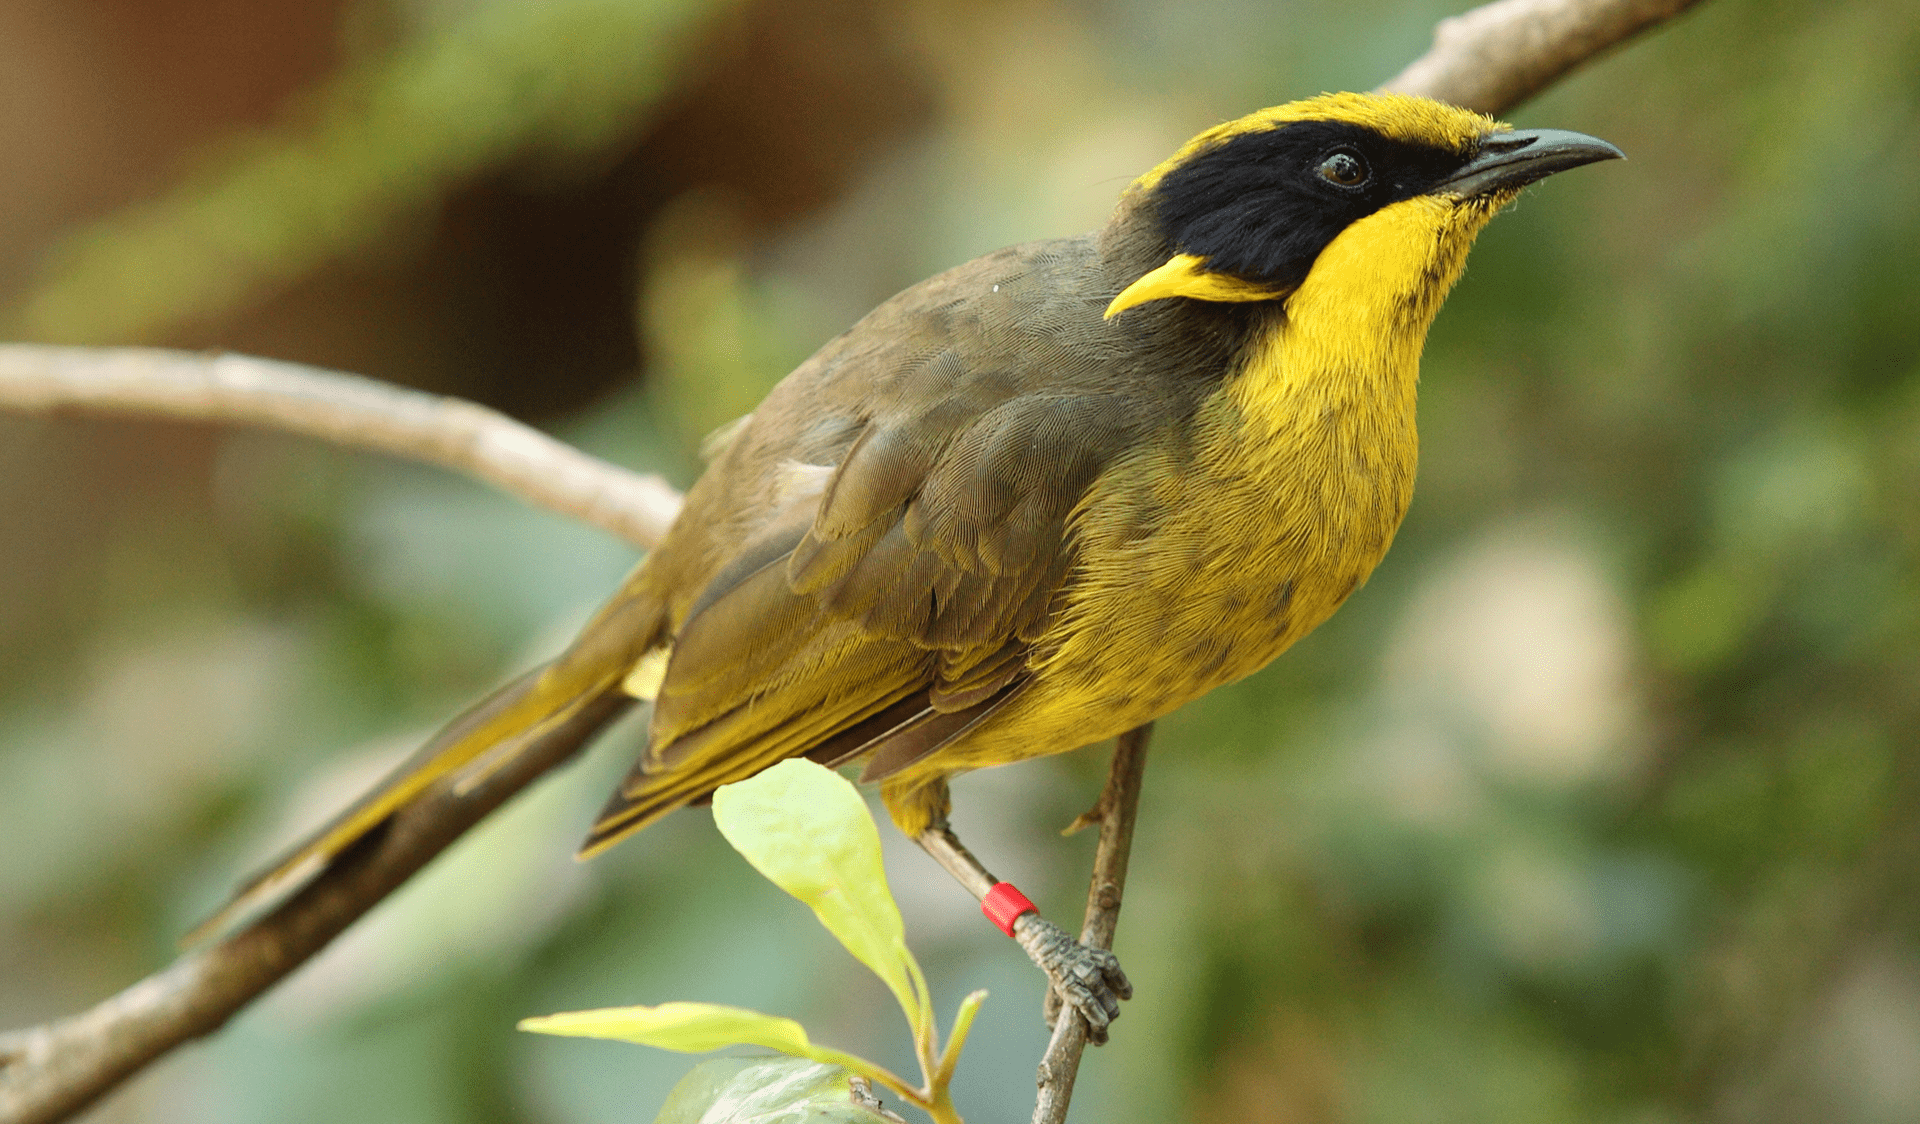 A Helmeted Honeyeater on a brand